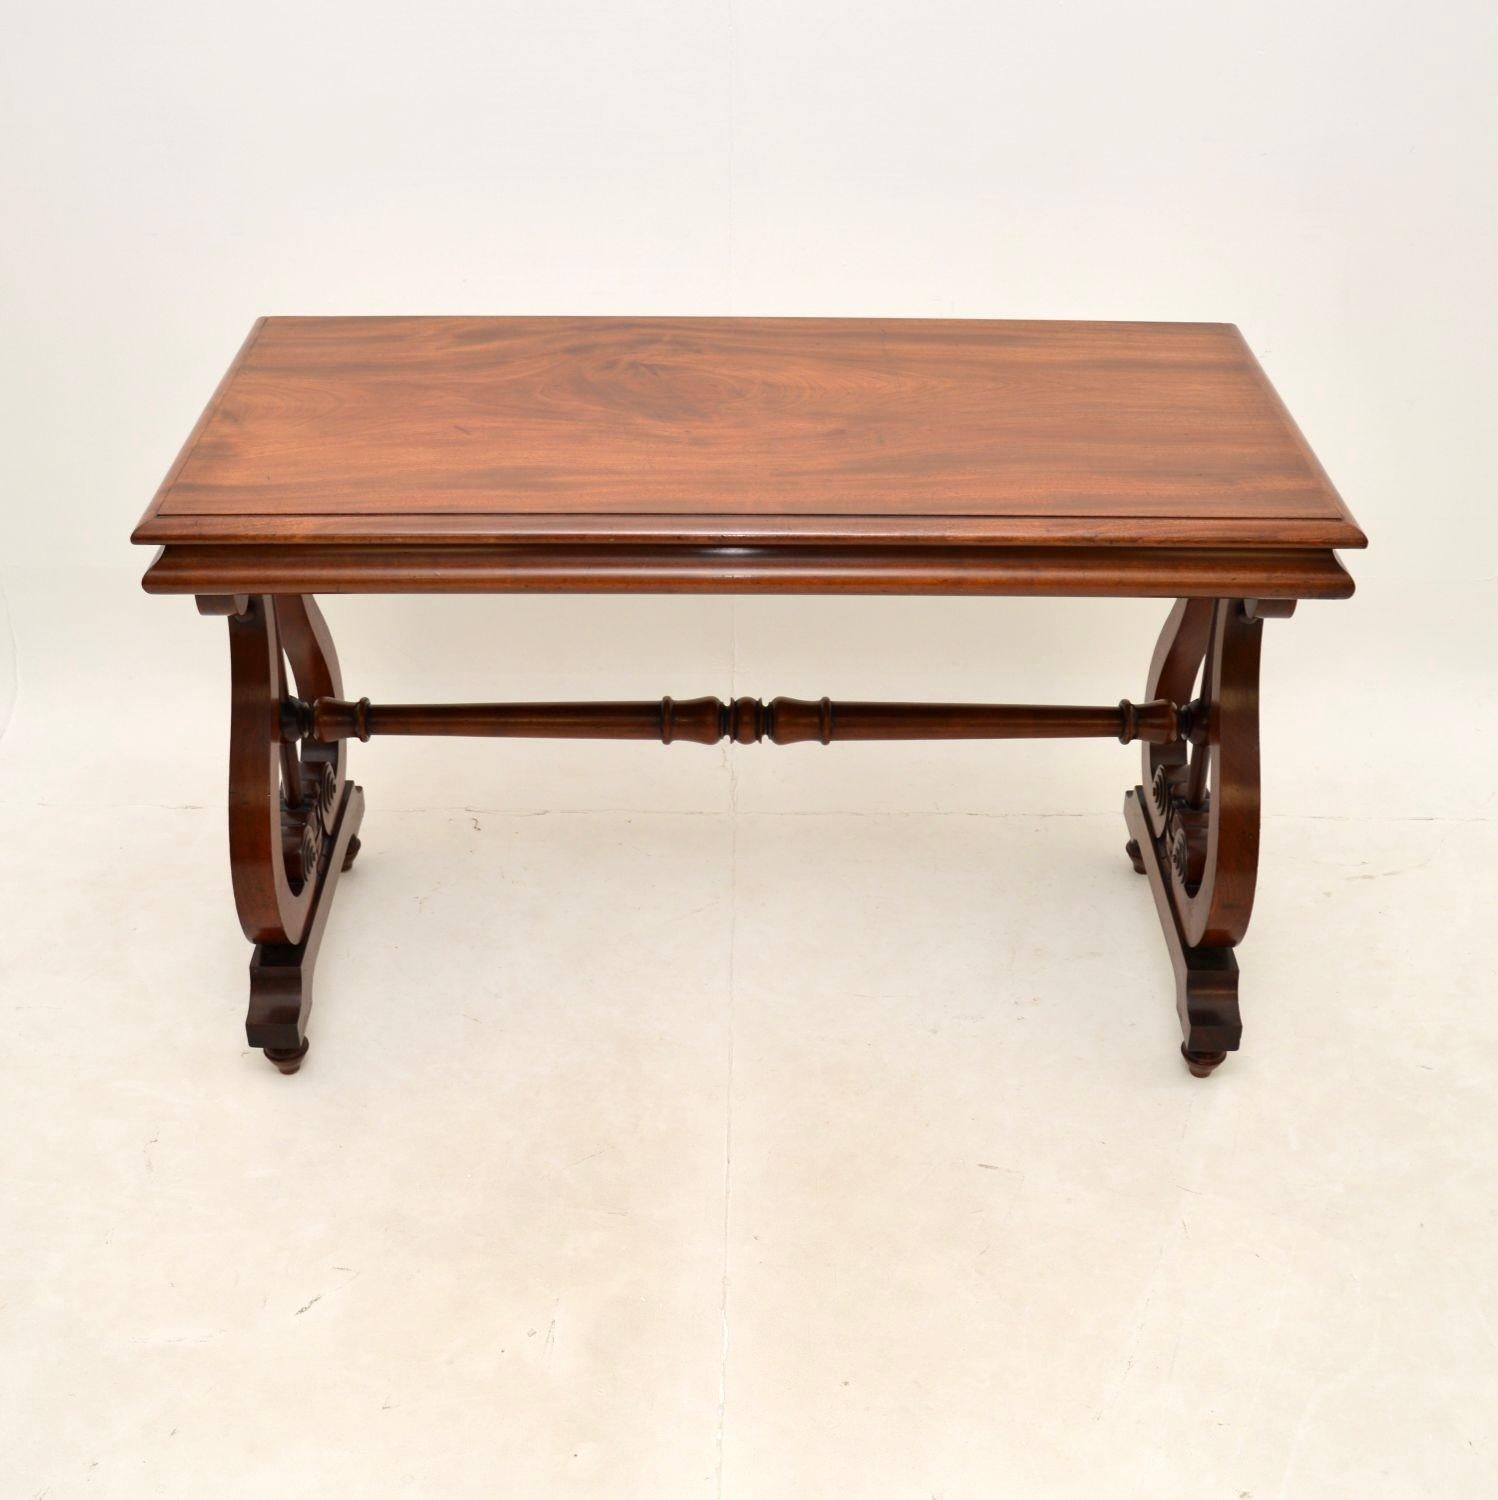 British Antique Regency Period Library Table / Desk For Sale